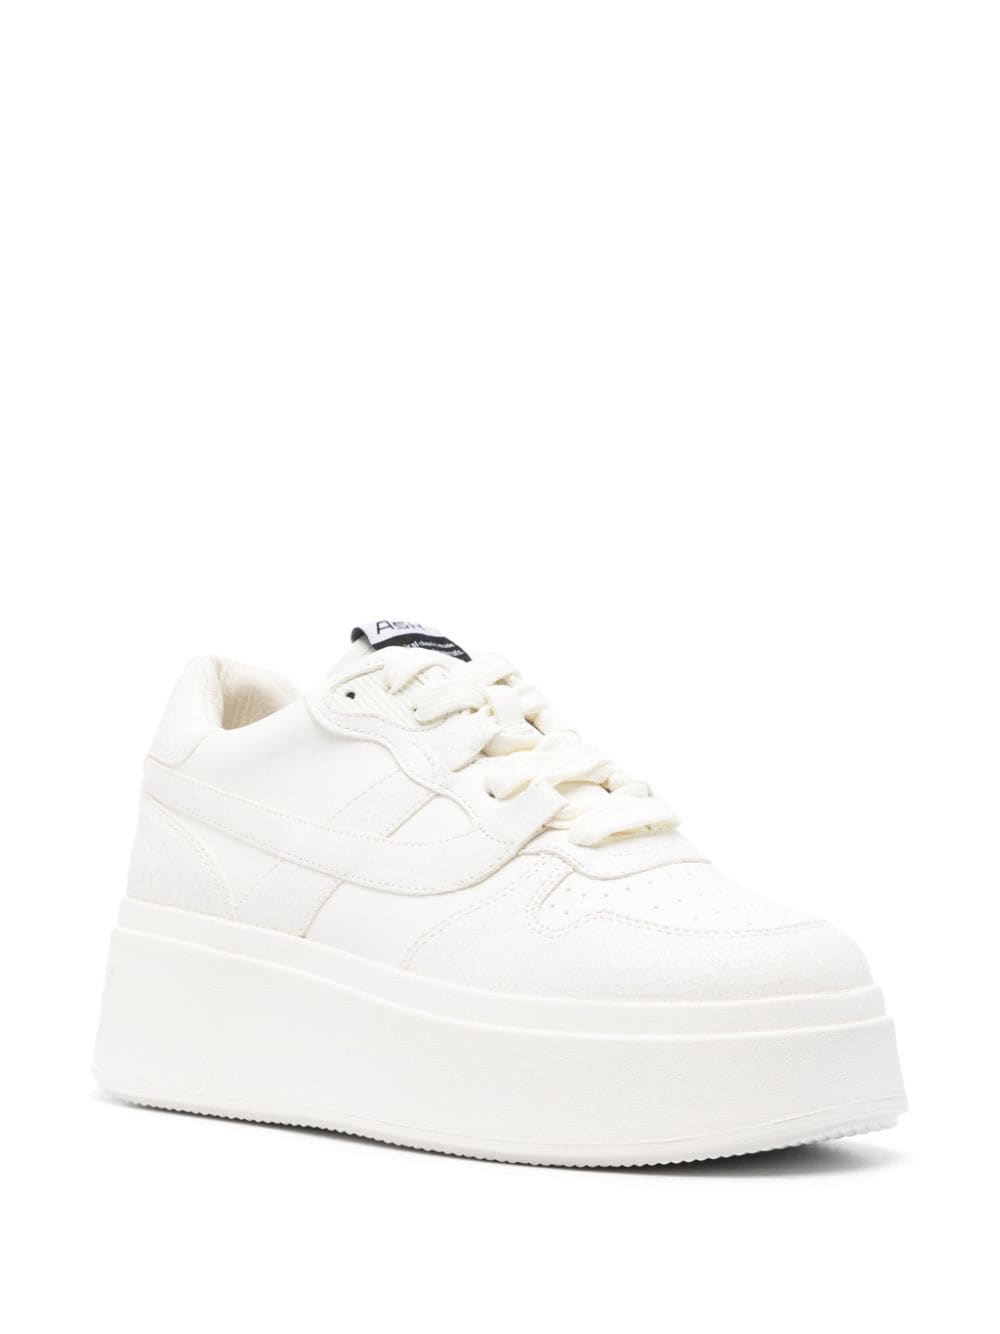 Shop Ash Match Platform Sneakers In White